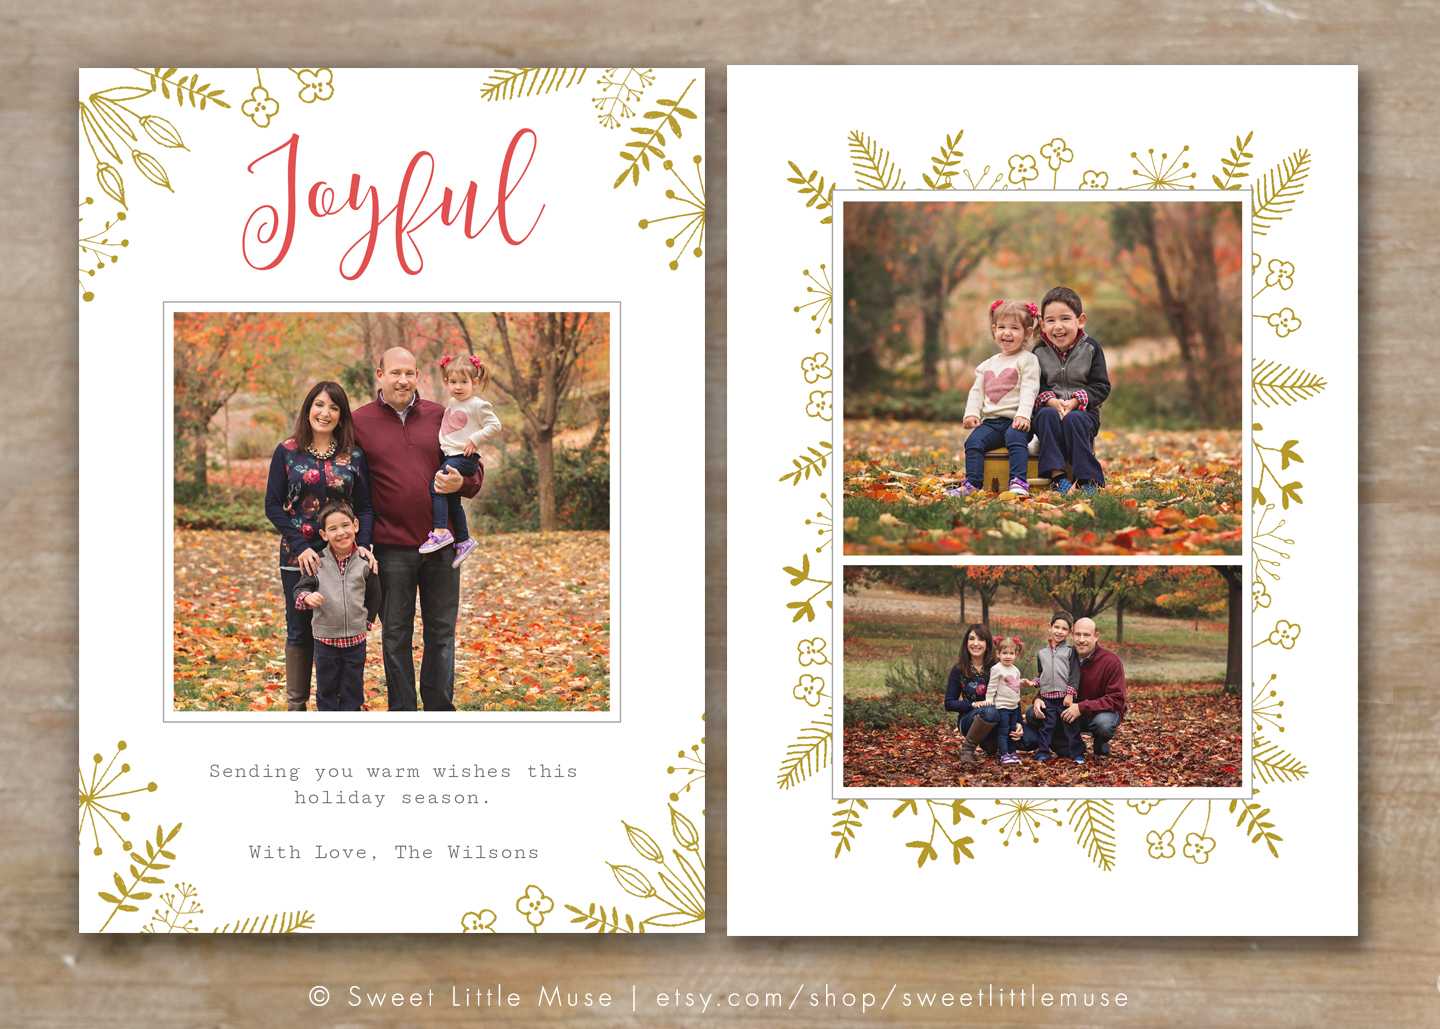 30 Holiday Card Templates For Photographers To Use This Year Throughout Christmas Photo Card Templates Photoshop